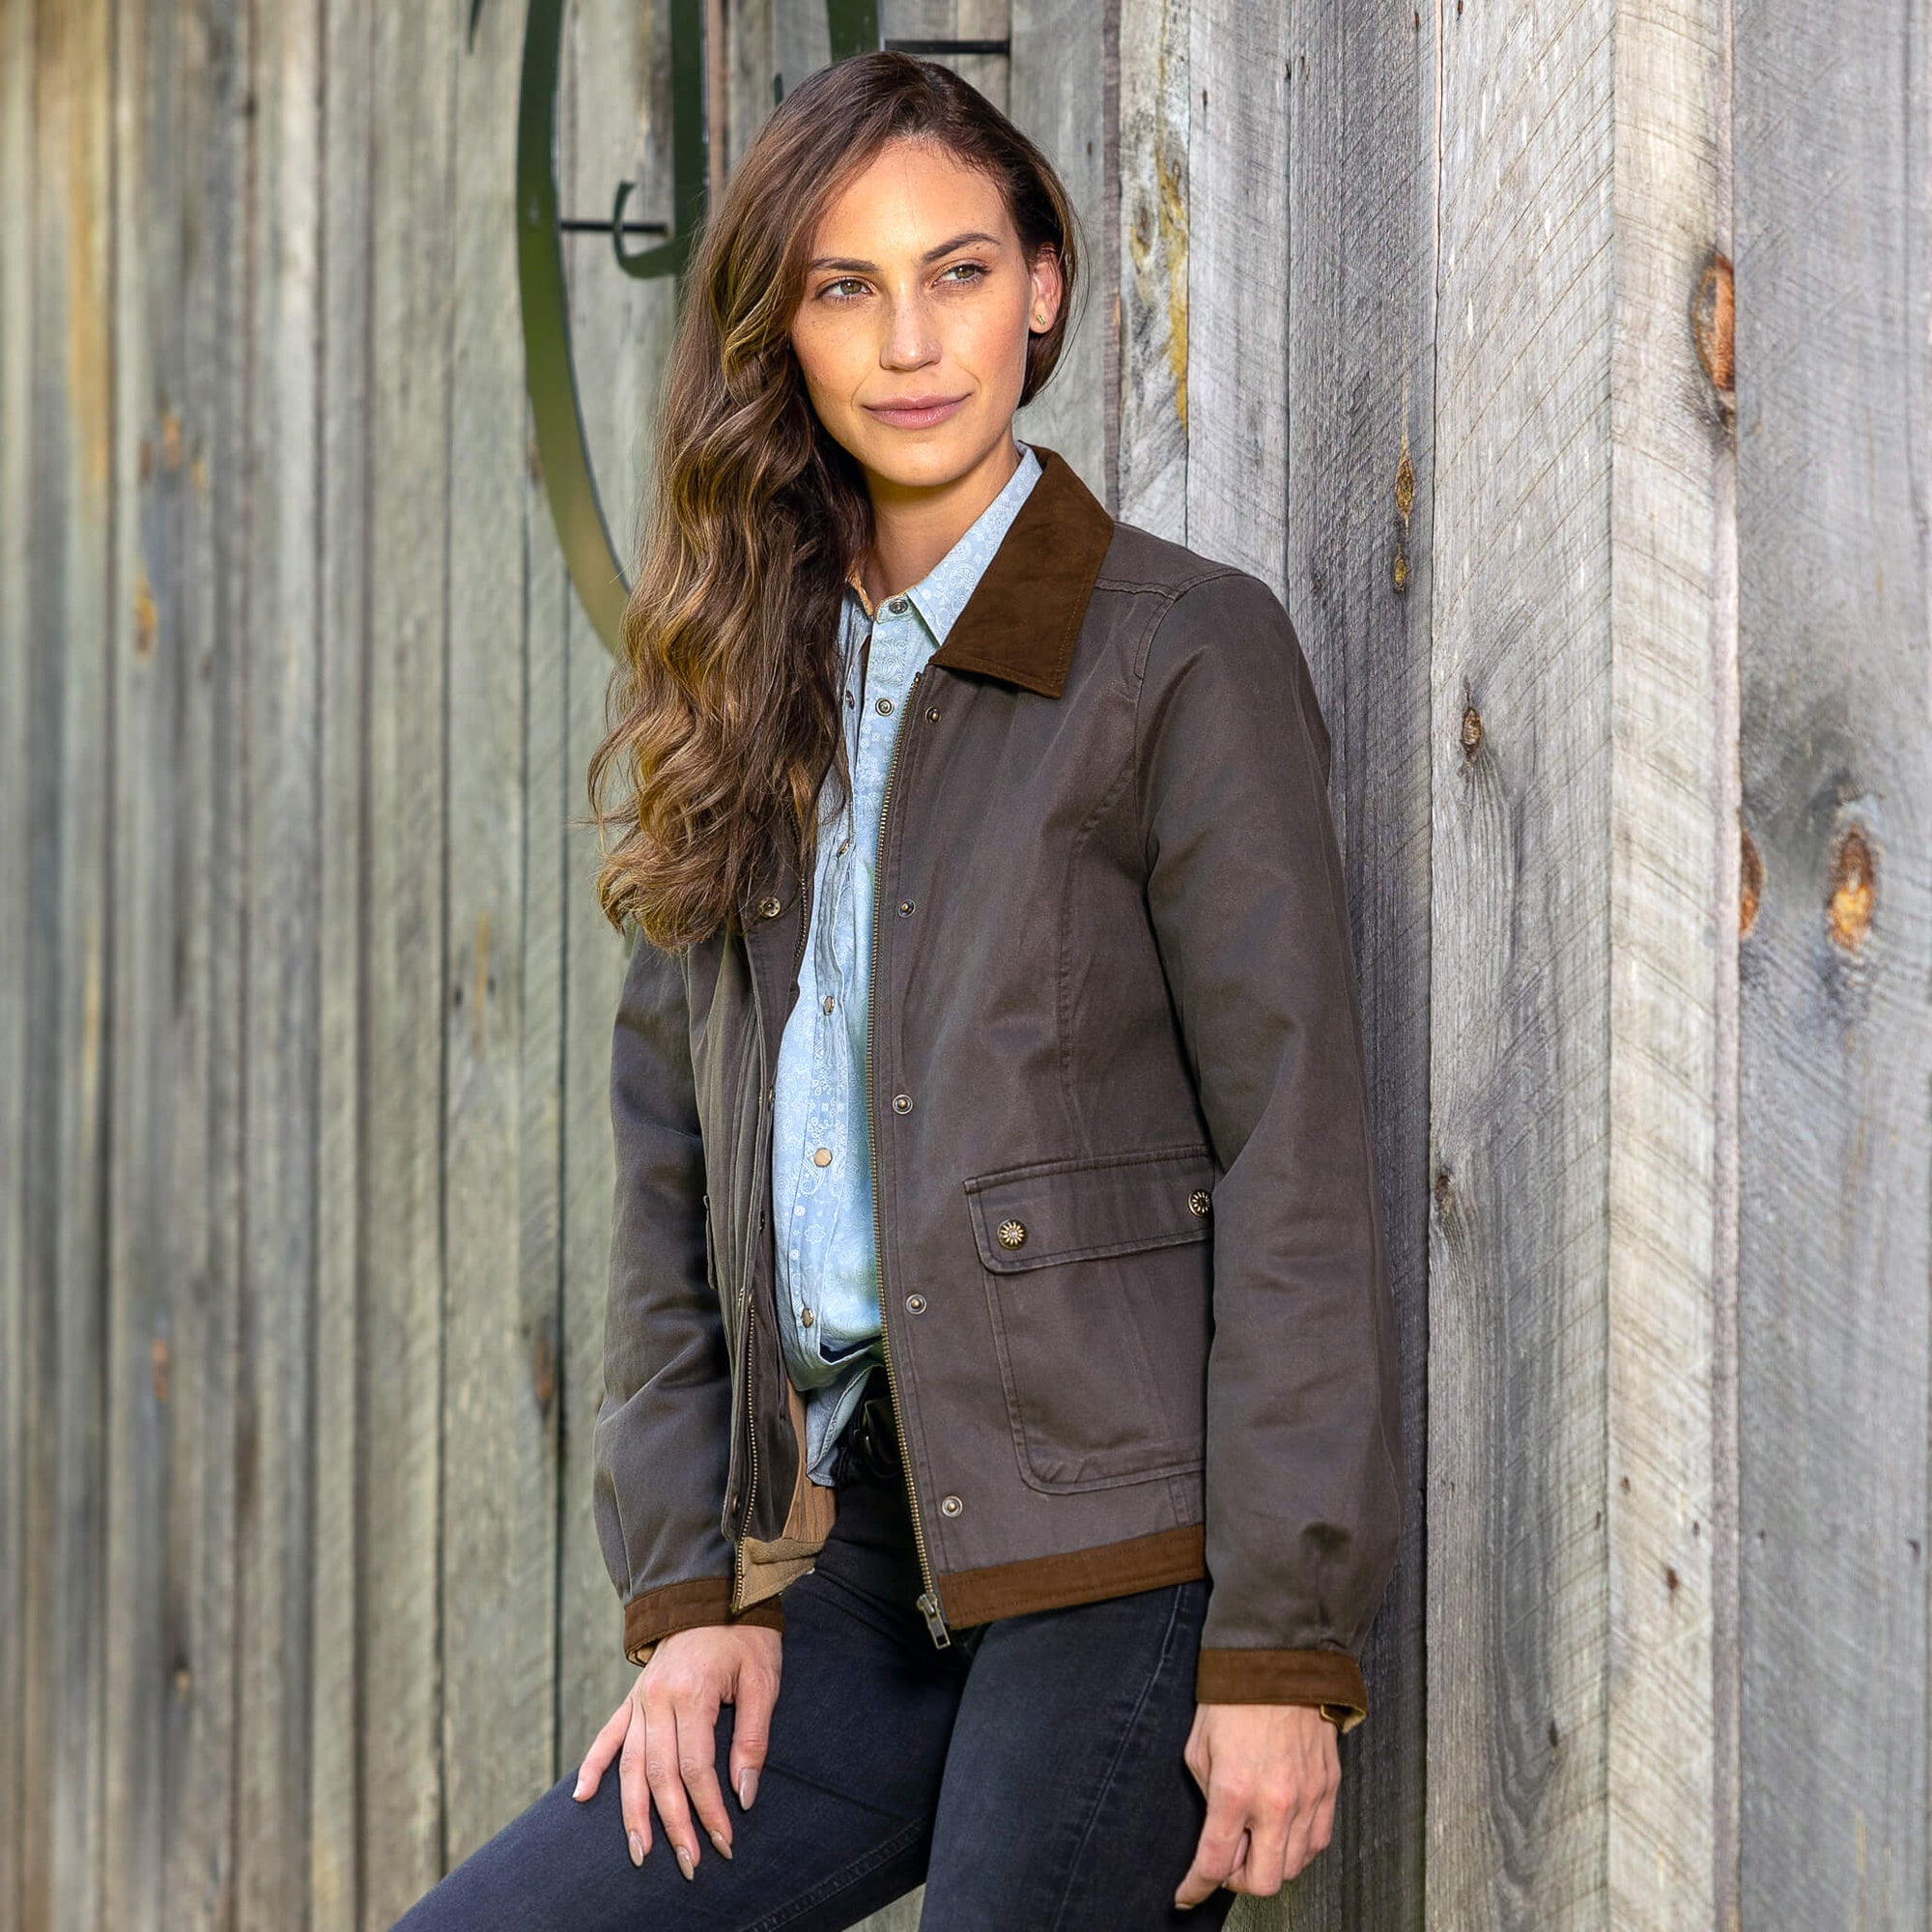 Georgia Conceal & Carry Twill Jacket - Madison Creek Outfitters